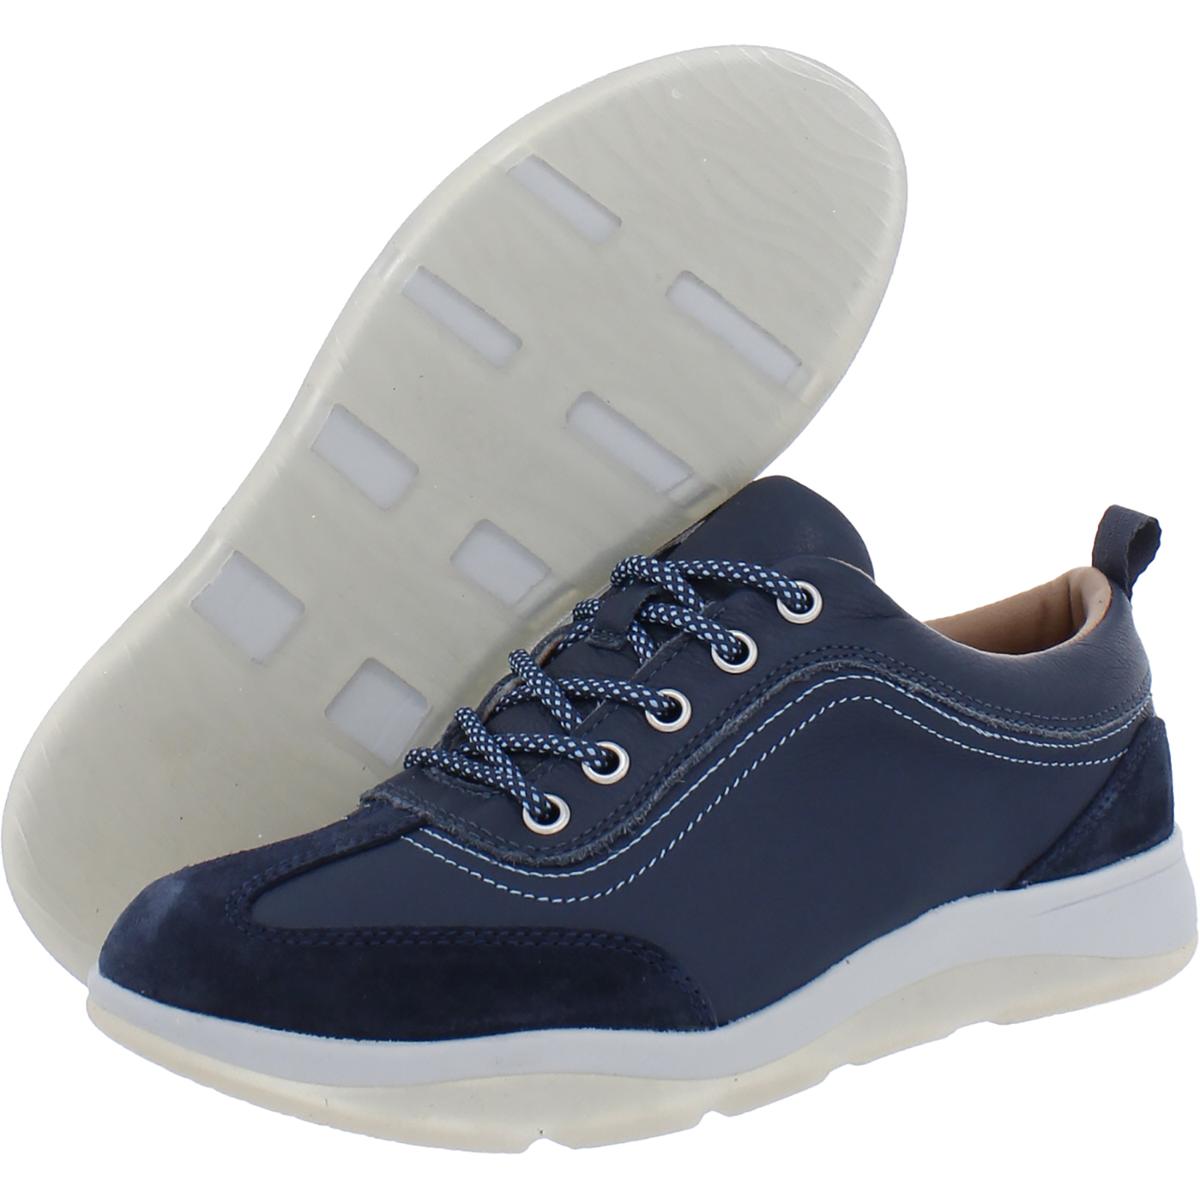 Vionic Nyla Women's Lace Up Casual Sneaker Navy - 9 Medium for sale ...